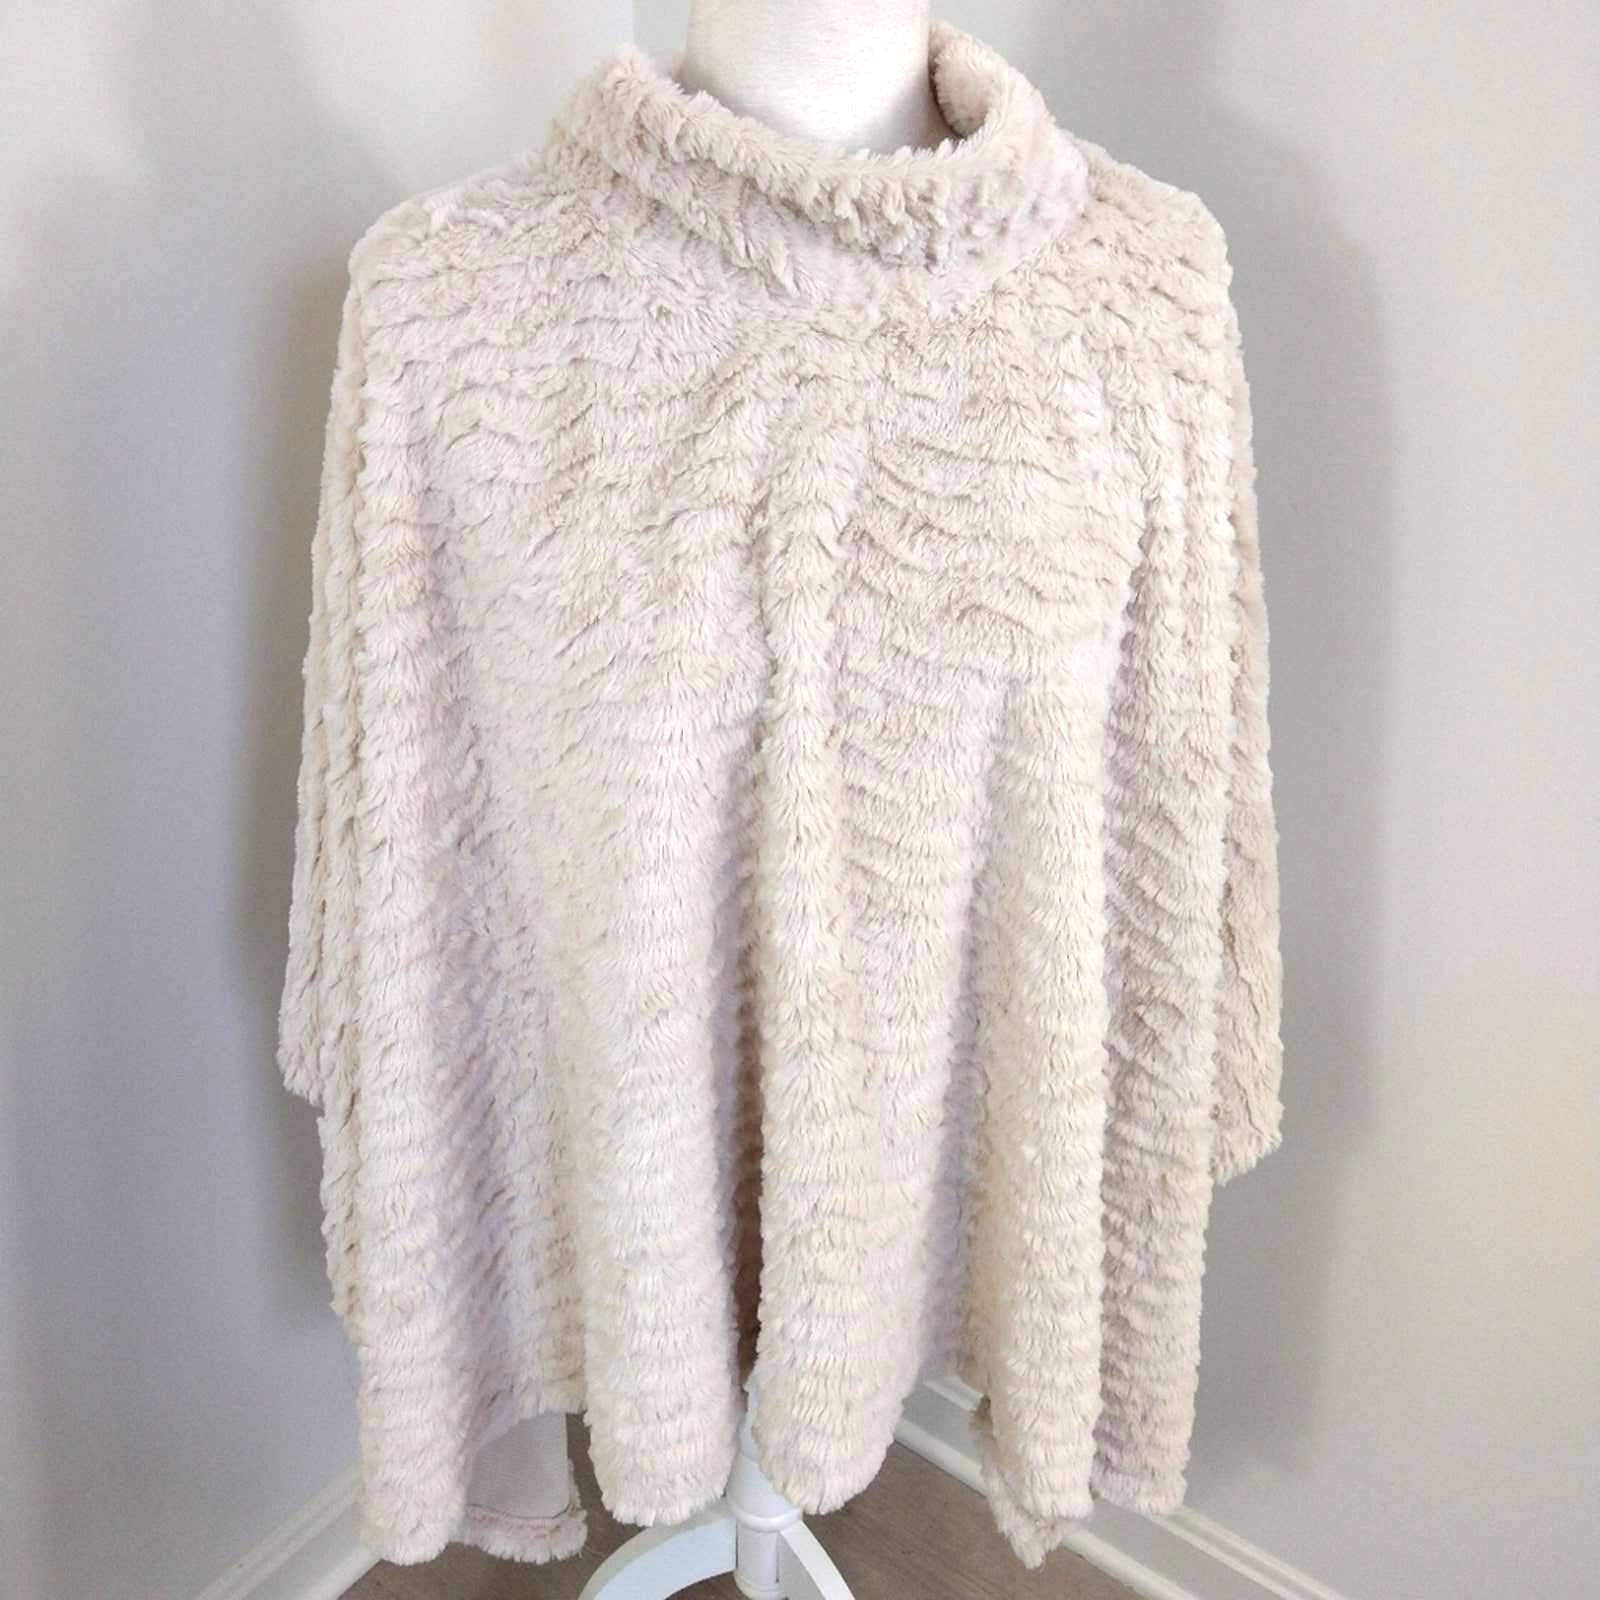 Wholesale price Le Moda cream tan soft faux fur poncho one size mock neck comfort shabby chic IwNl3g6Vd all for you